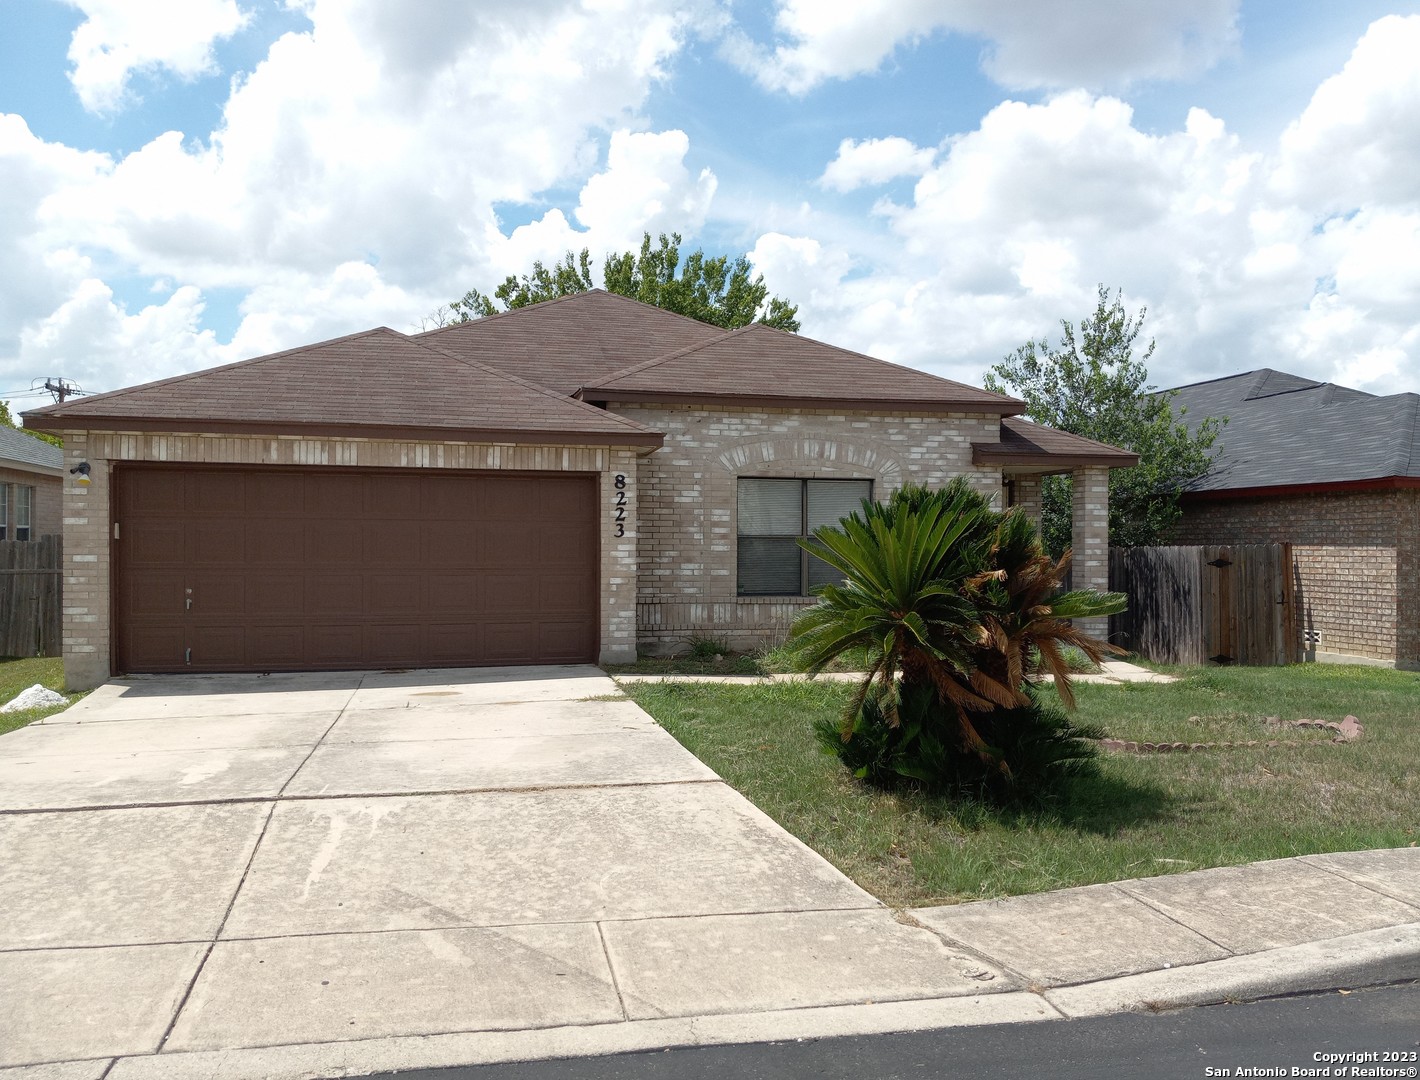 Photo of 8223 Cherry Glade in Converse, TX